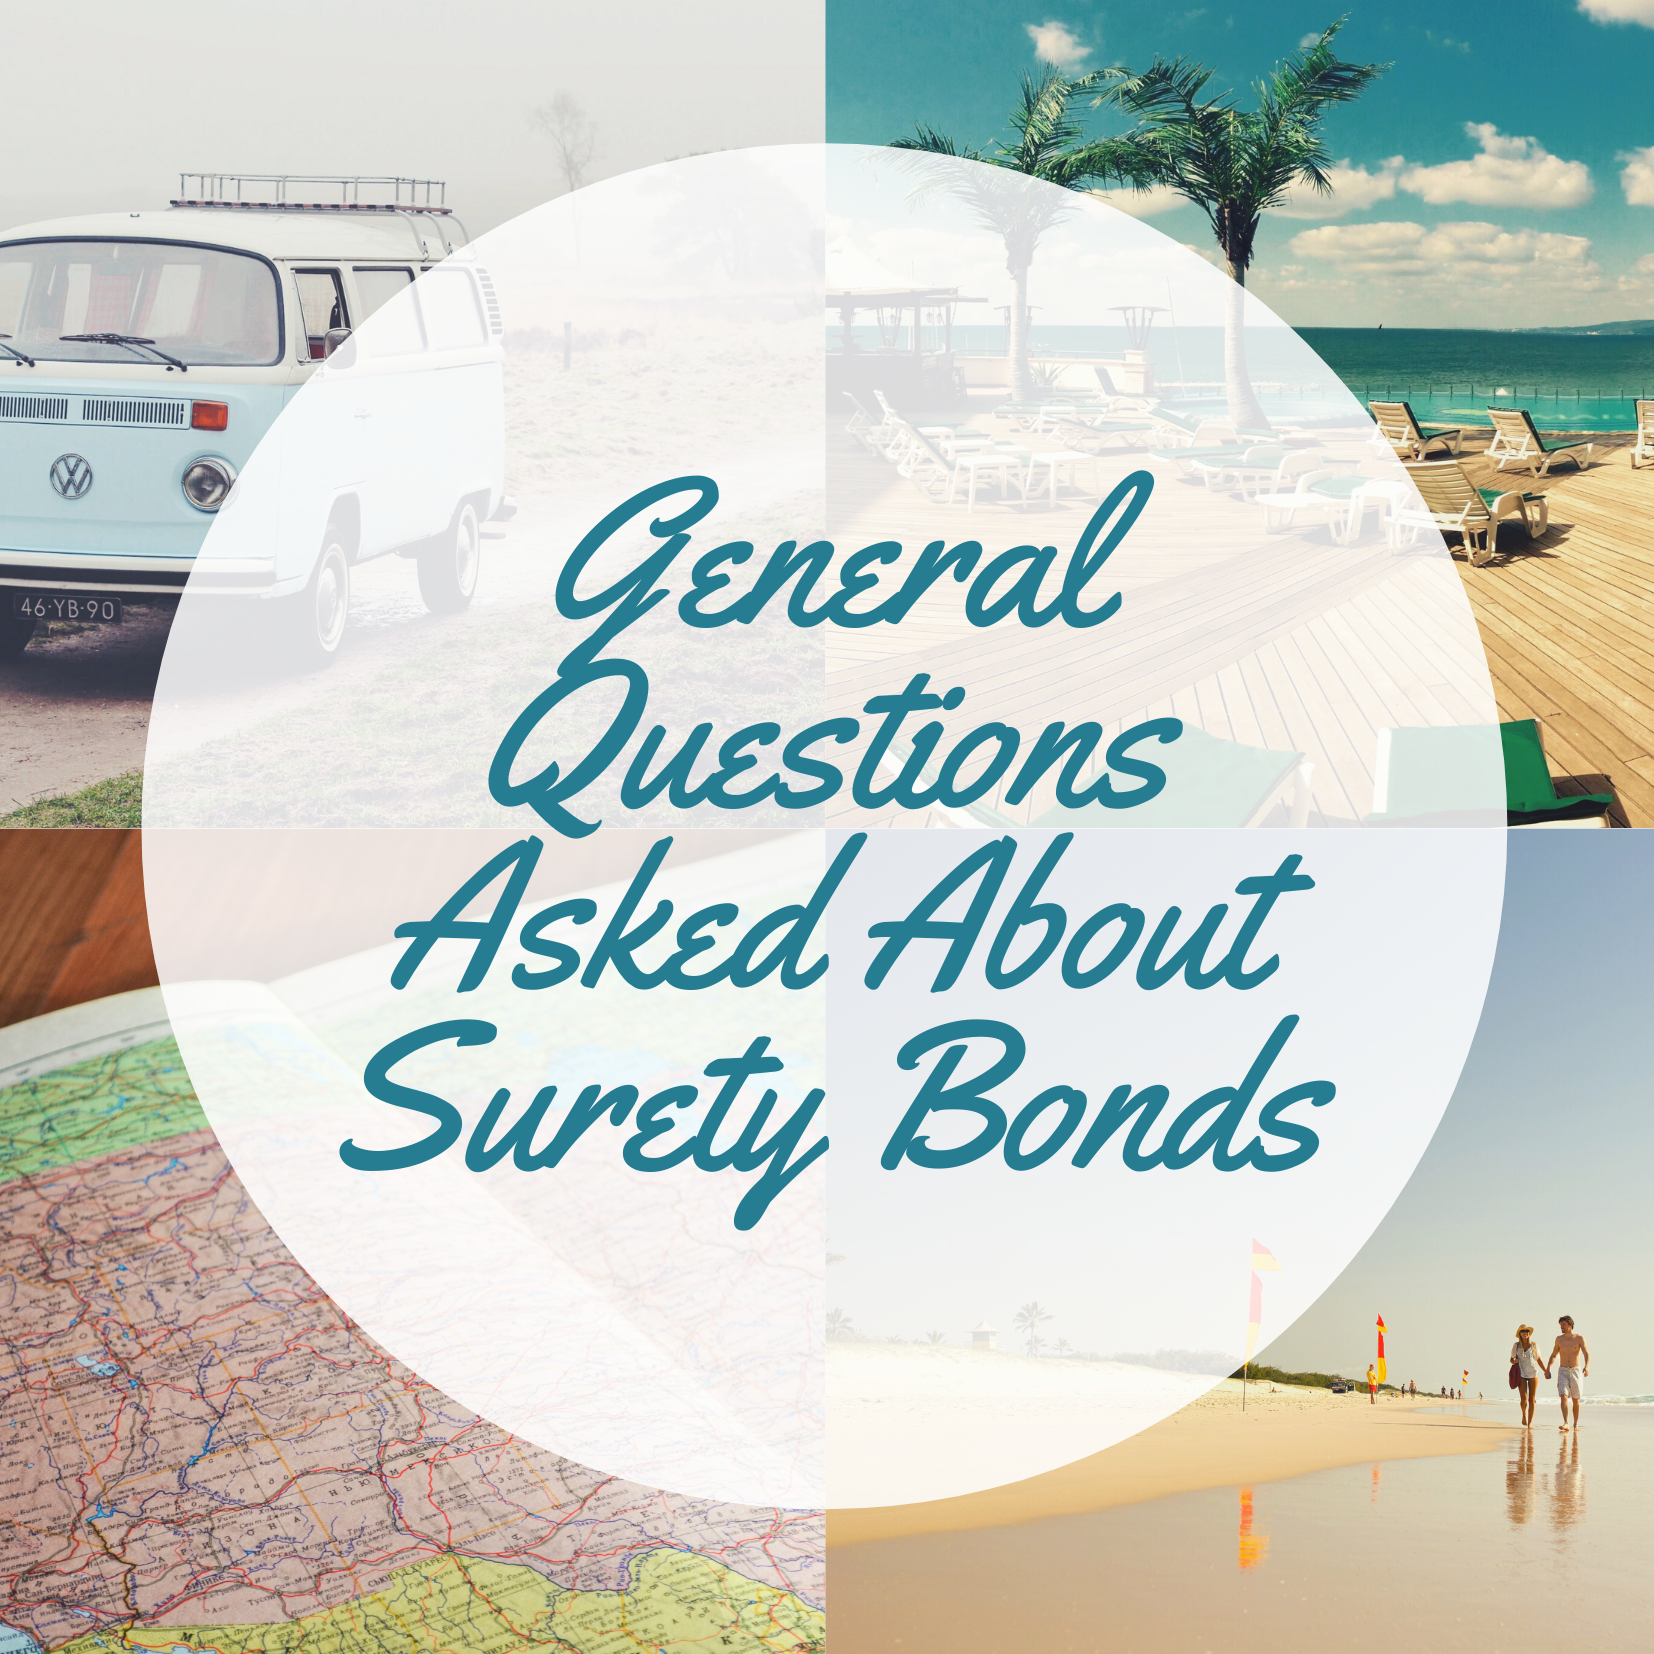 surety bonds - hat are surety bonds and how do they work - beach vibe photos 